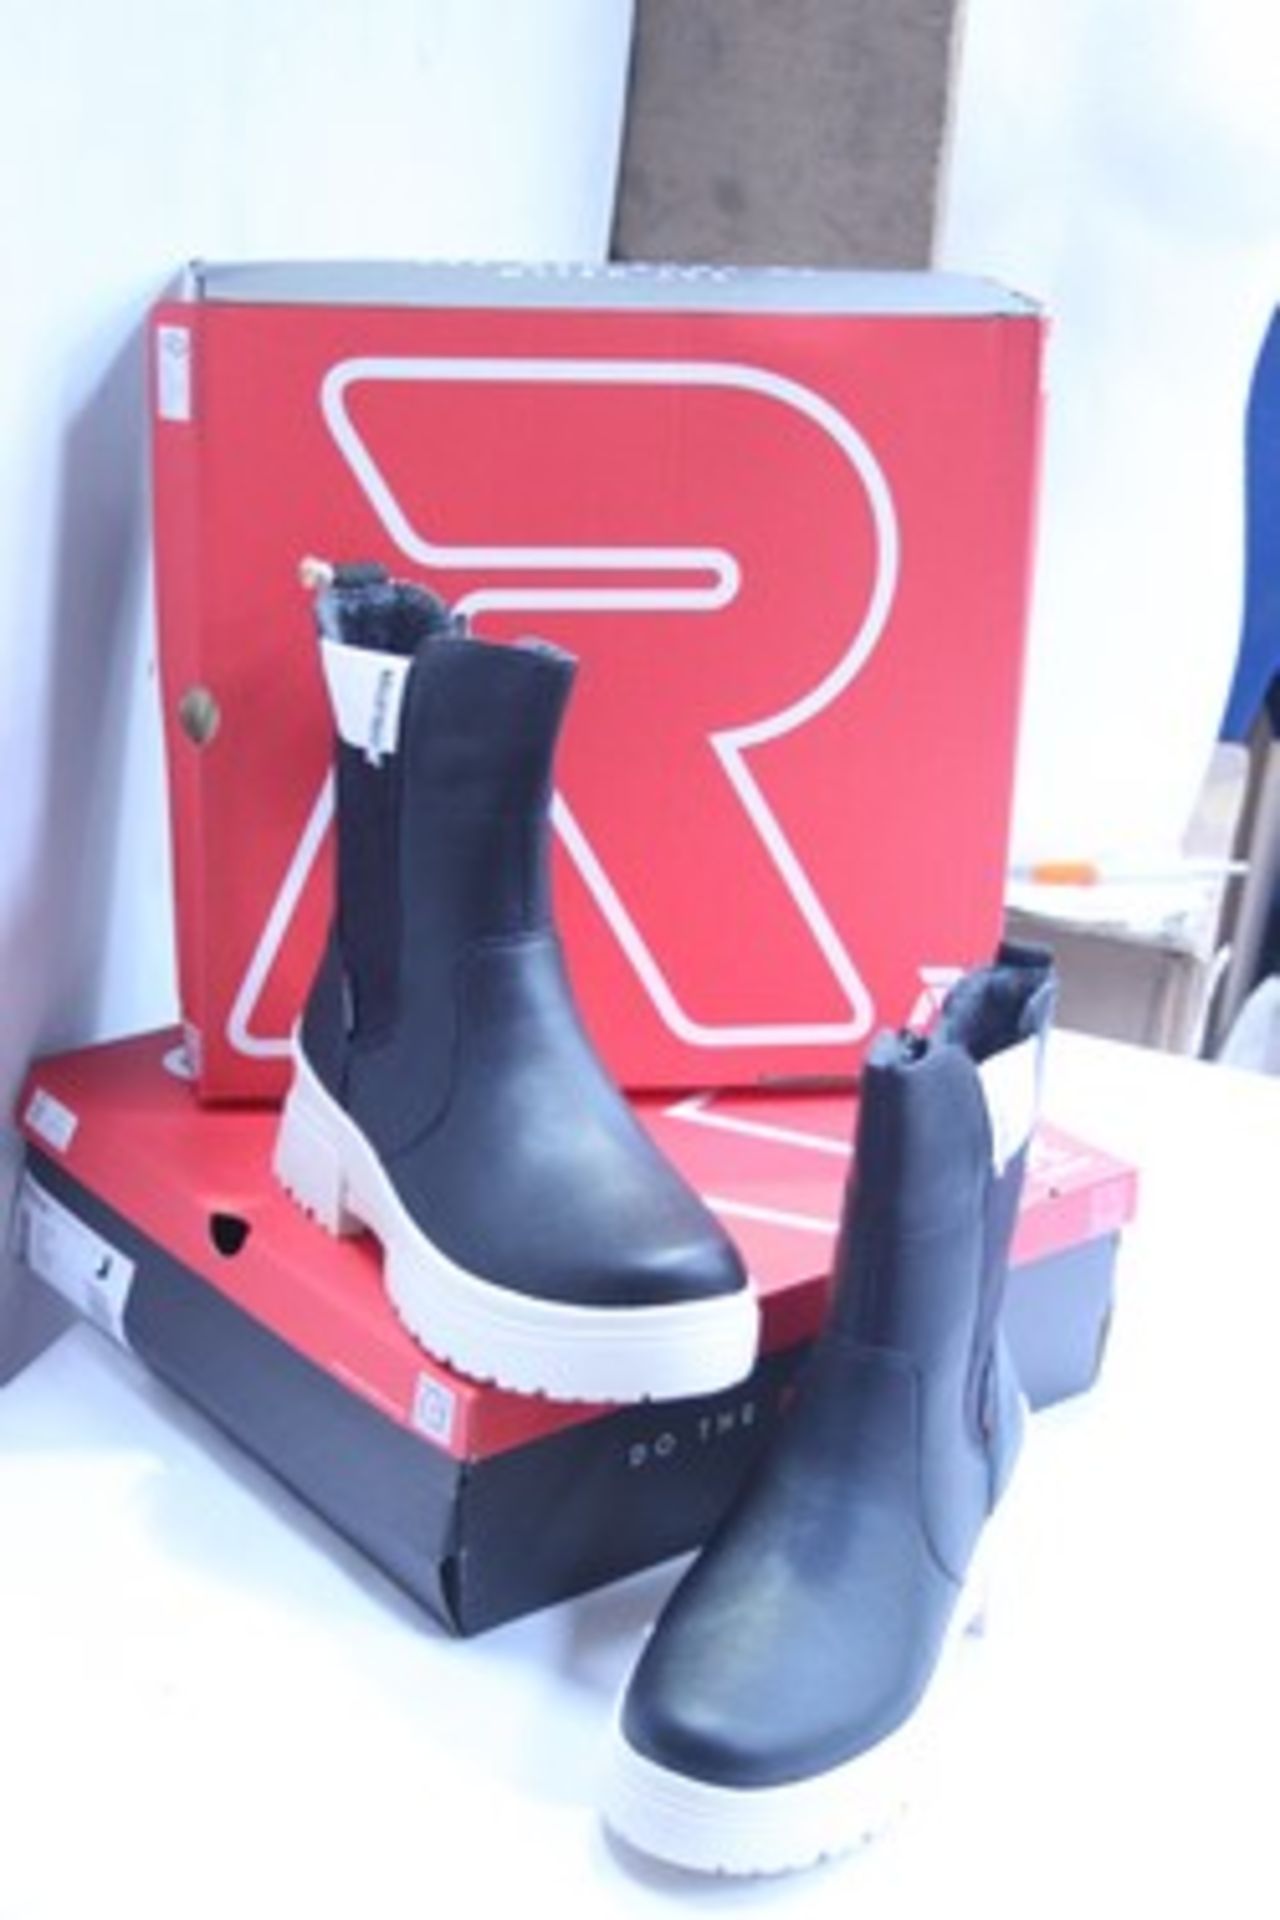 2 x pairs of Rieker Revolution black boots, 1 x size 39 and 1 x size 38, style WO380-00 - New in box